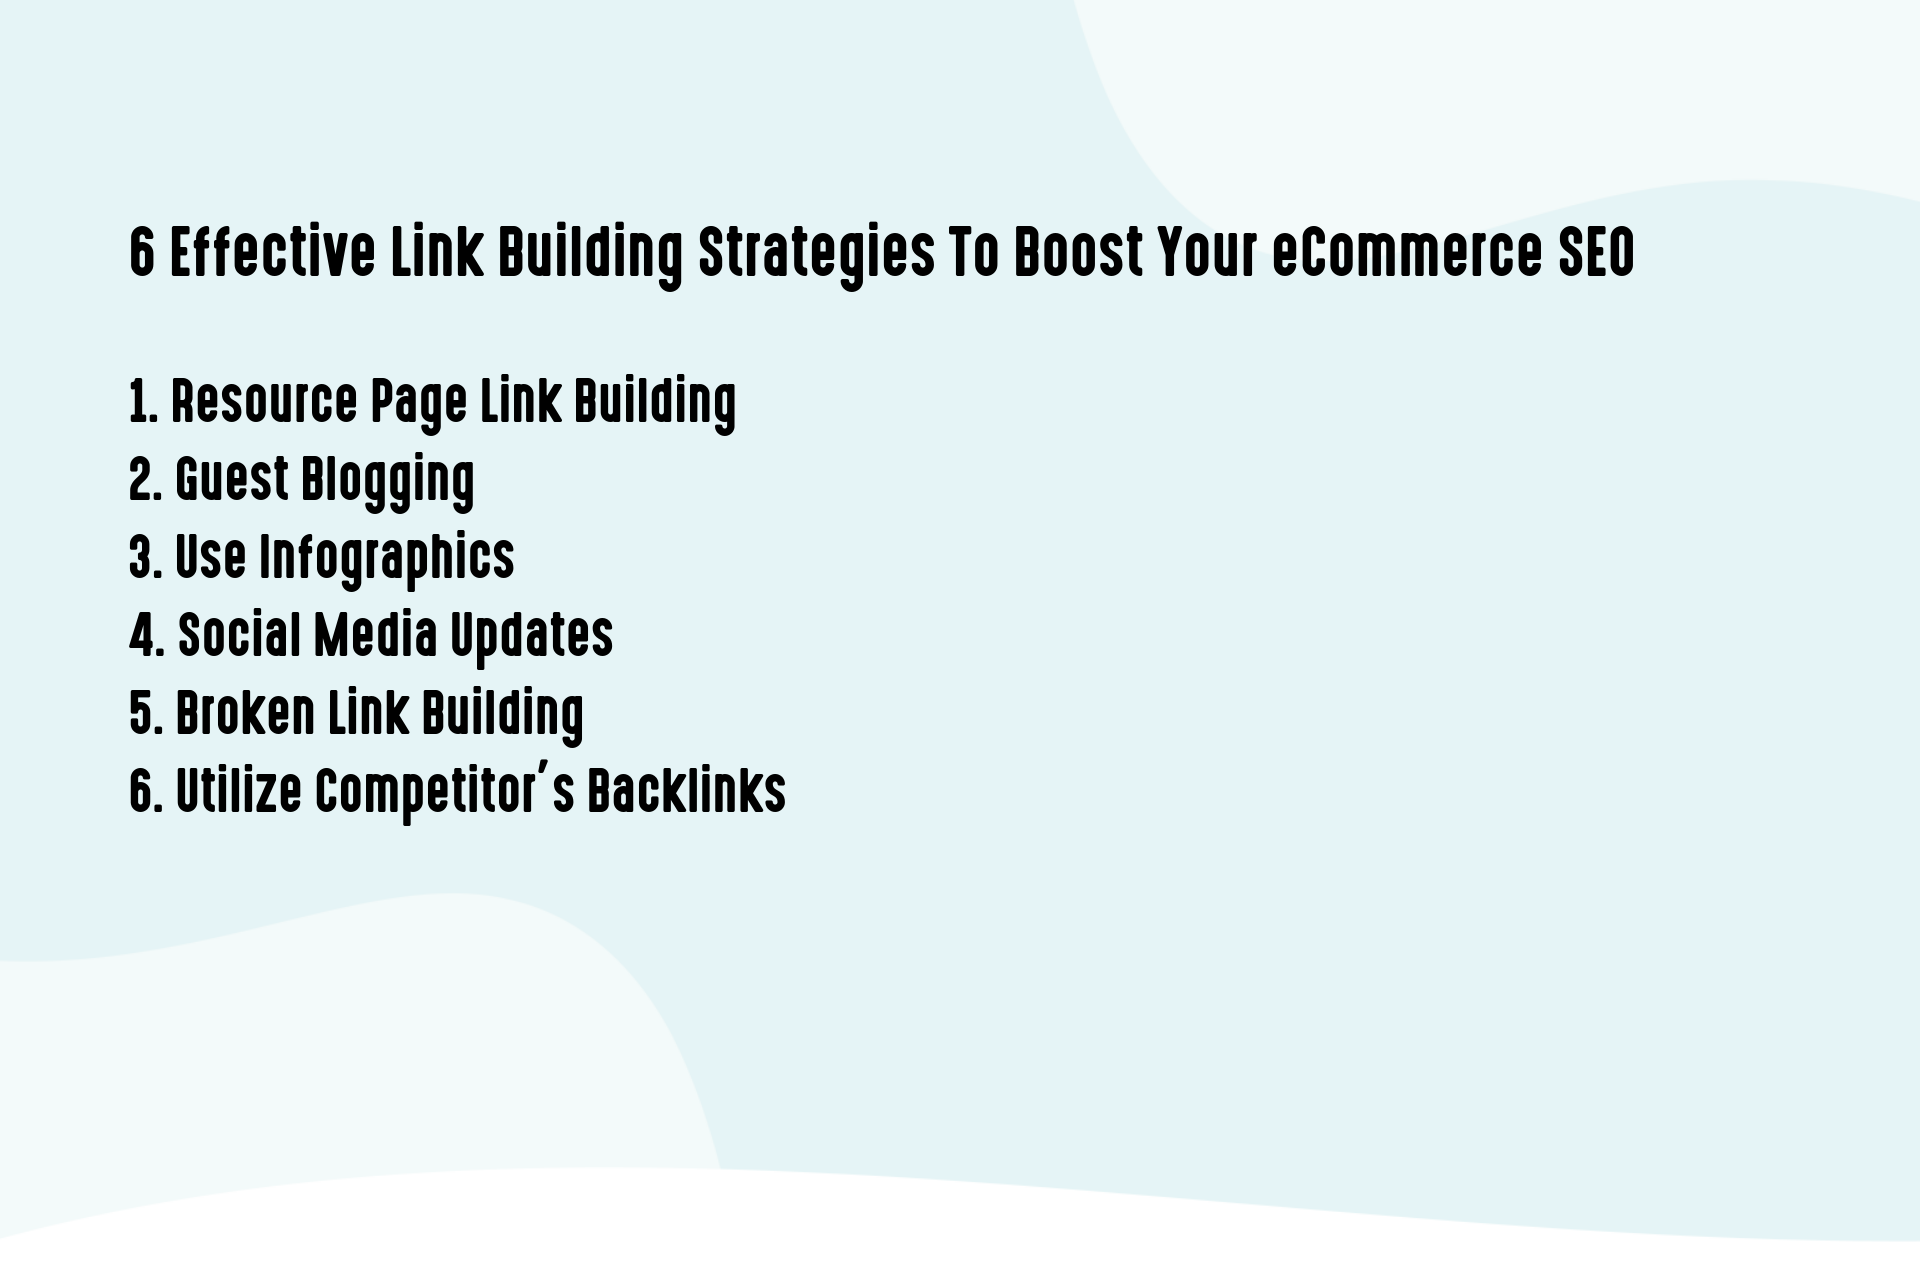 6 Effective Link Building Strategies To Boost Your eCommerce SEO